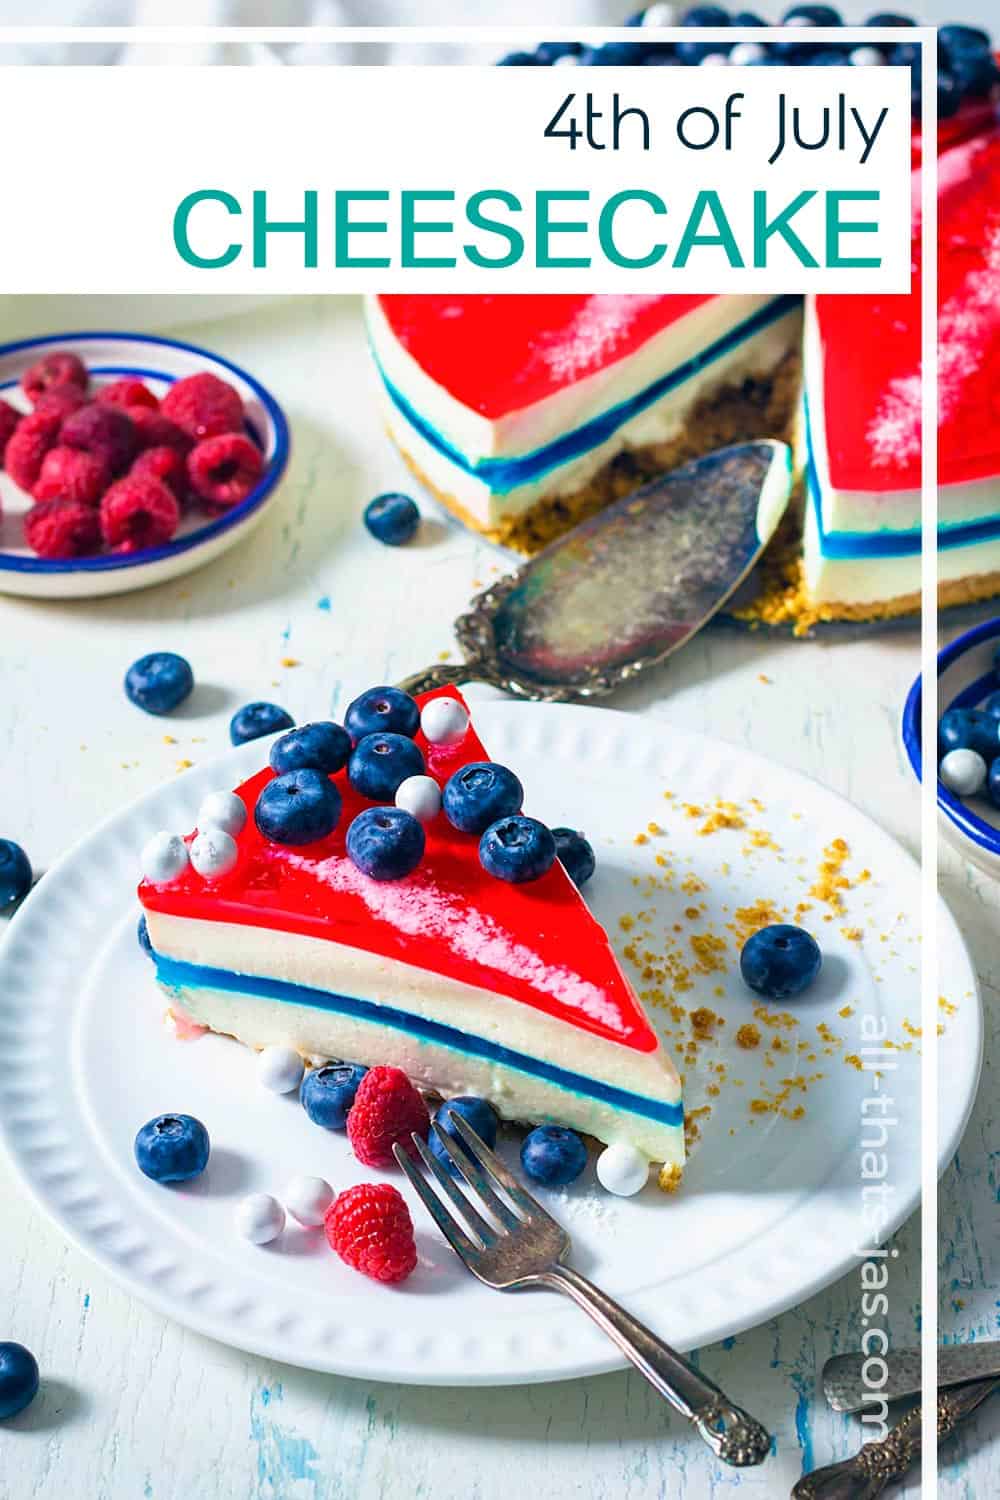 A slice of fourth of July cheesecake on a plate with fork and text overlay.